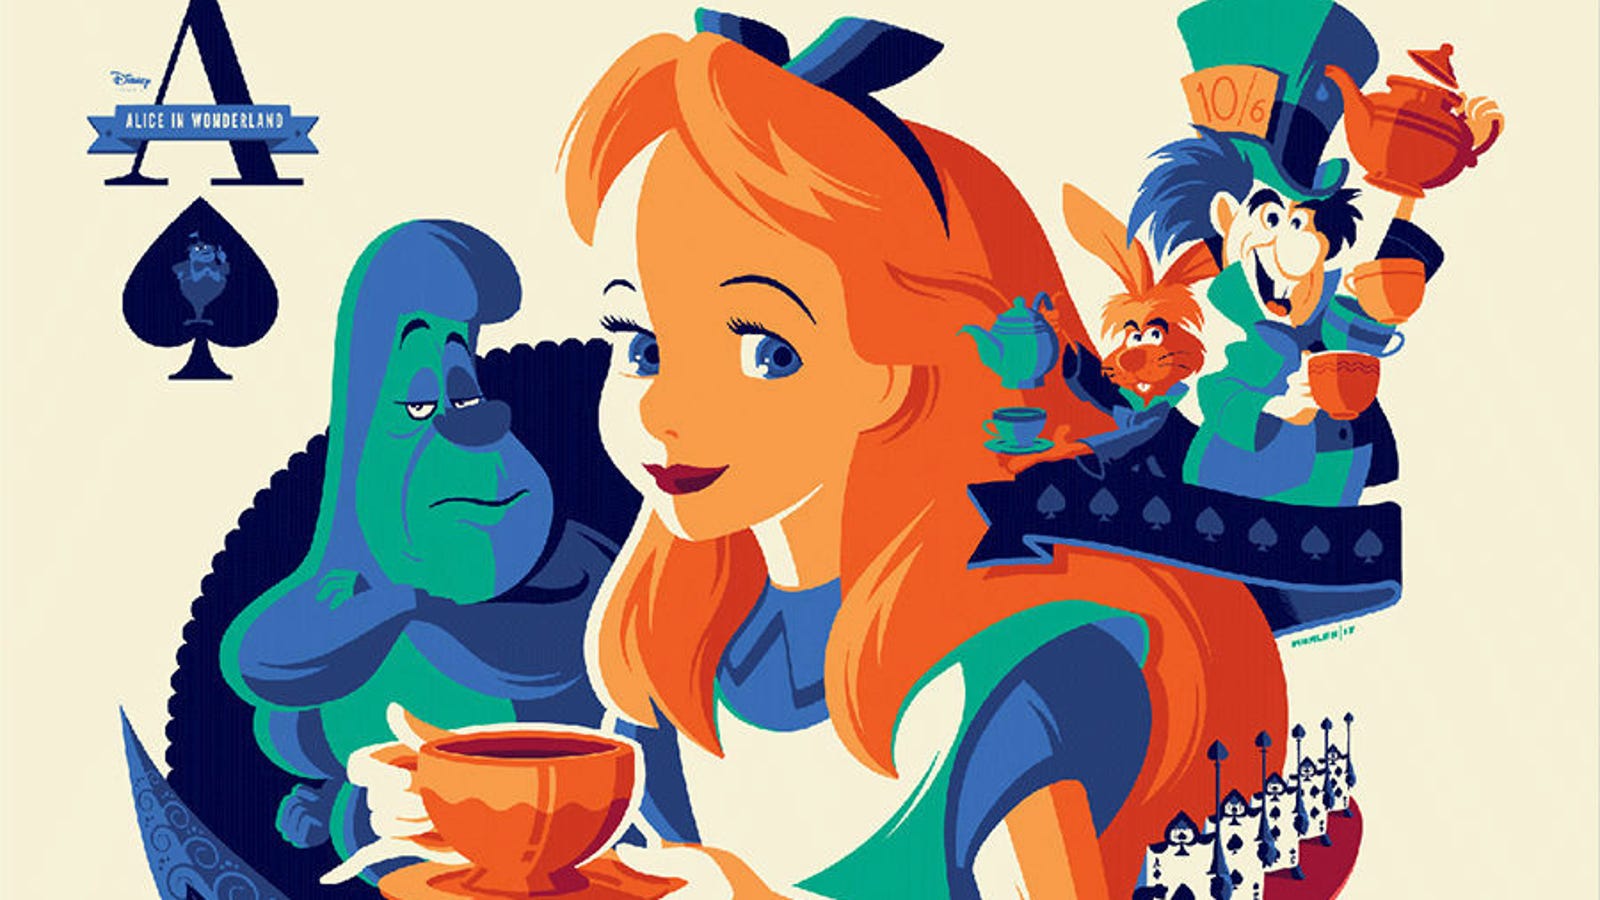 This Beautiful, Classic Disney-Inspired Art Show Is a Time-Warp to Your